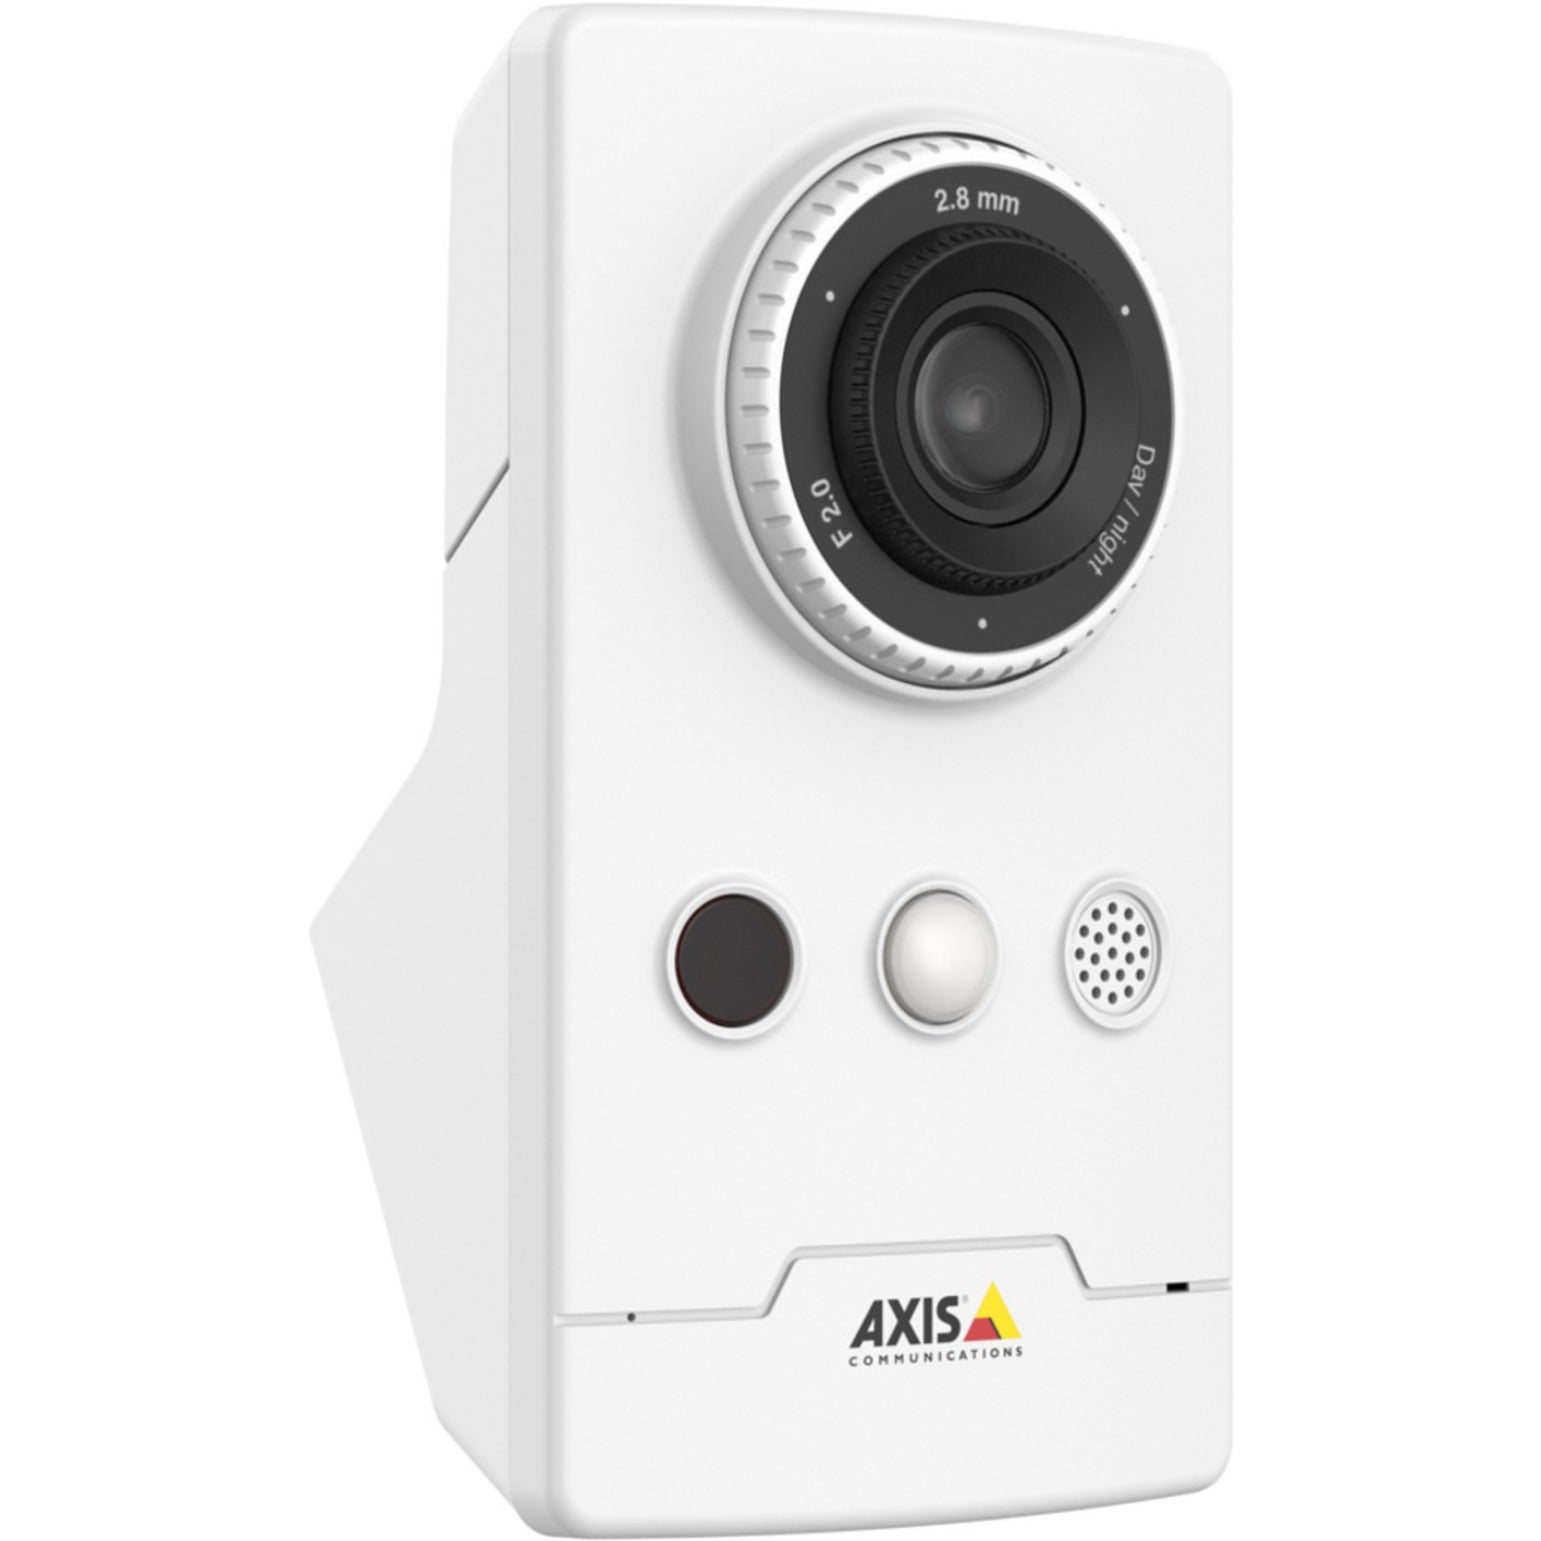 AXIS 0810-004 M1065-LW Full-featured Wireless HDTV 1080p Camera, Monochrome, Color, TAA Compliant